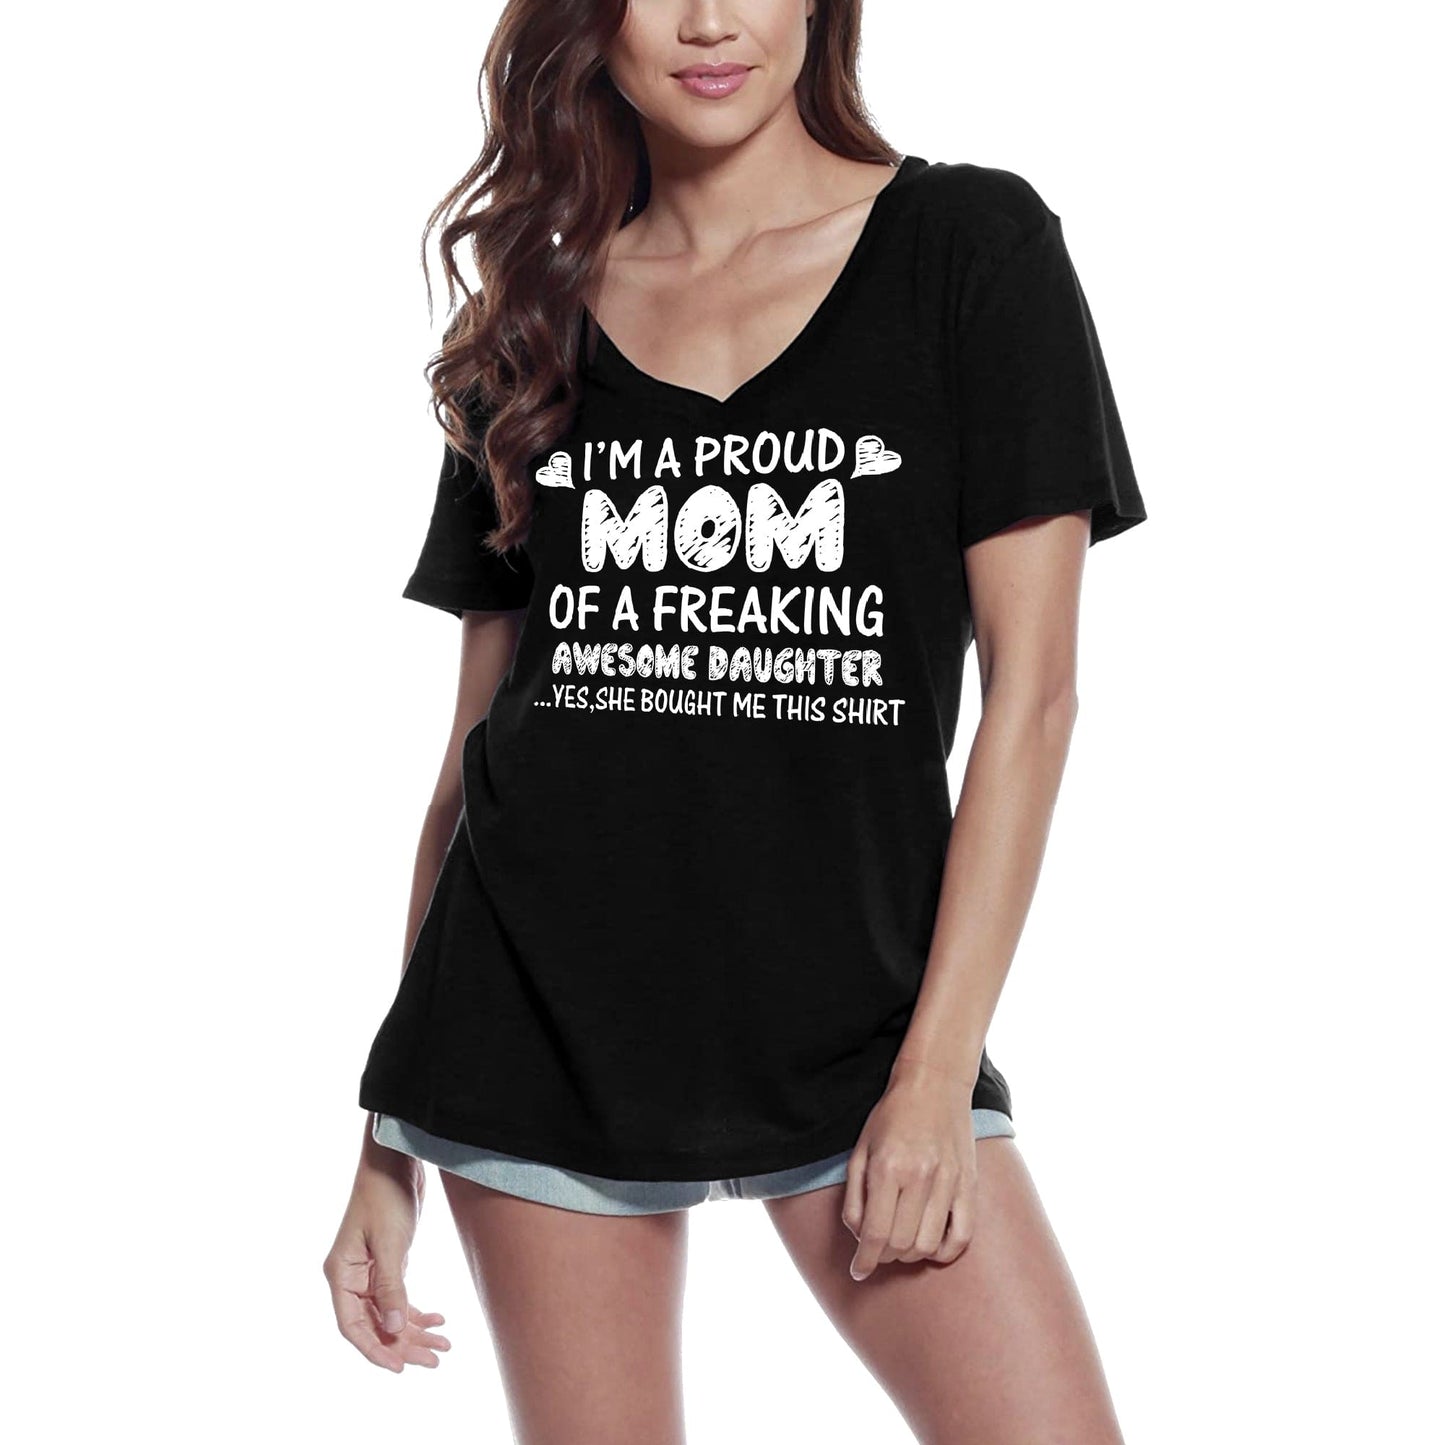 ULTRABASIC Damen-T-Shirt „I'm a Proud Mom of a Freaking Awesome Daughter – Yes, She Bought Me This Shirt“ – Lustiges T-Shirt für Mutter